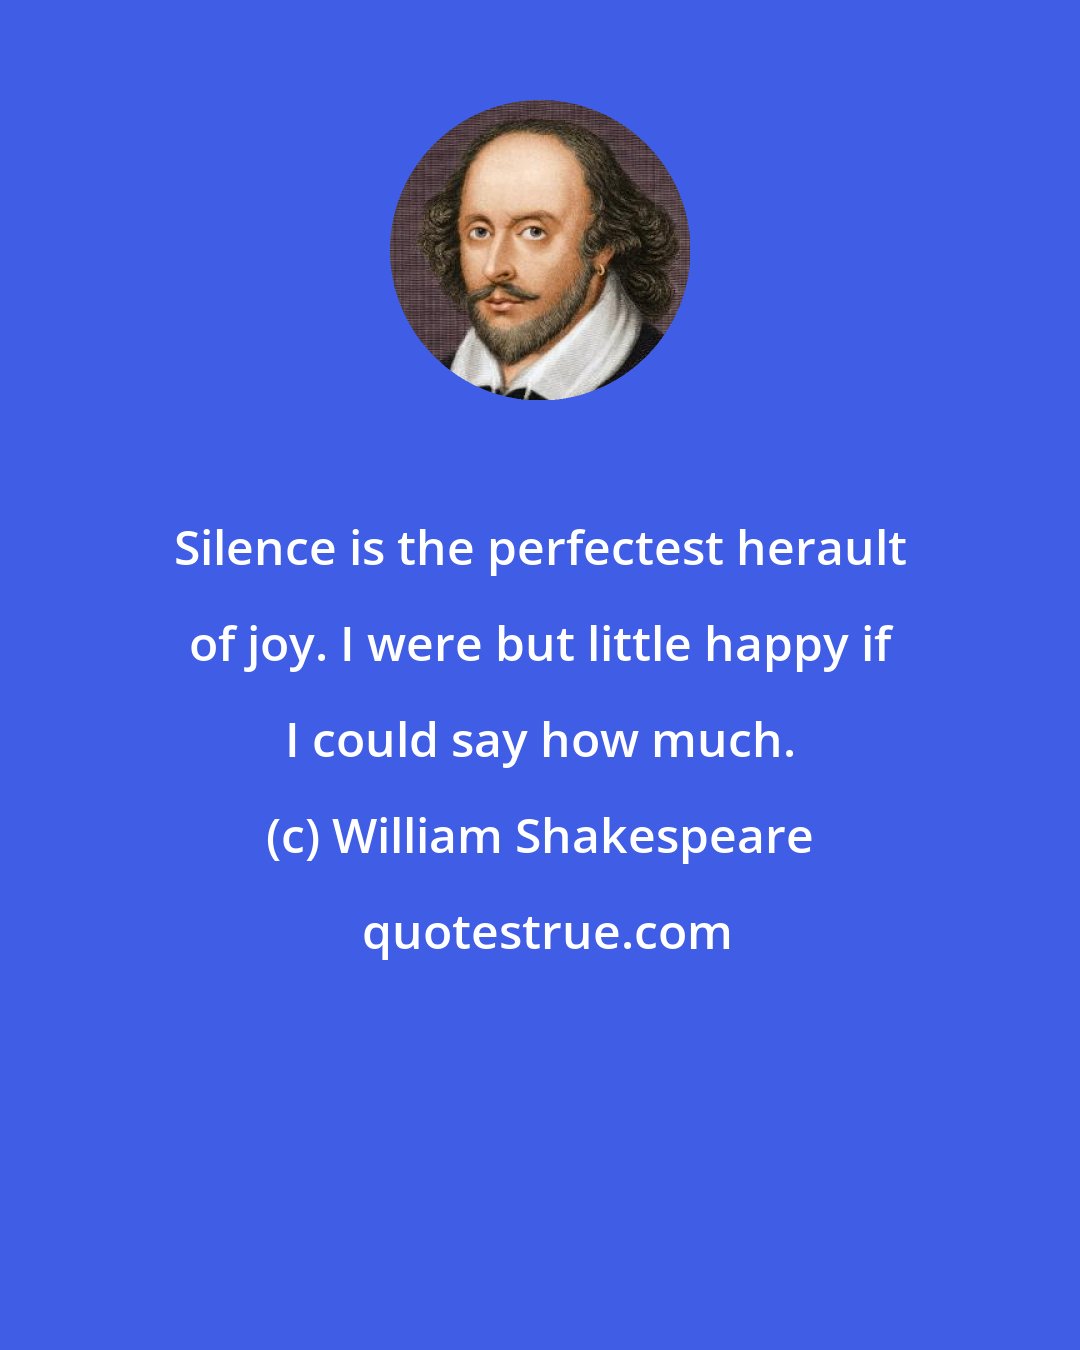 William Shakespeare: Silence is the perfectest herault of joy. I were but little happy if I could say how much.